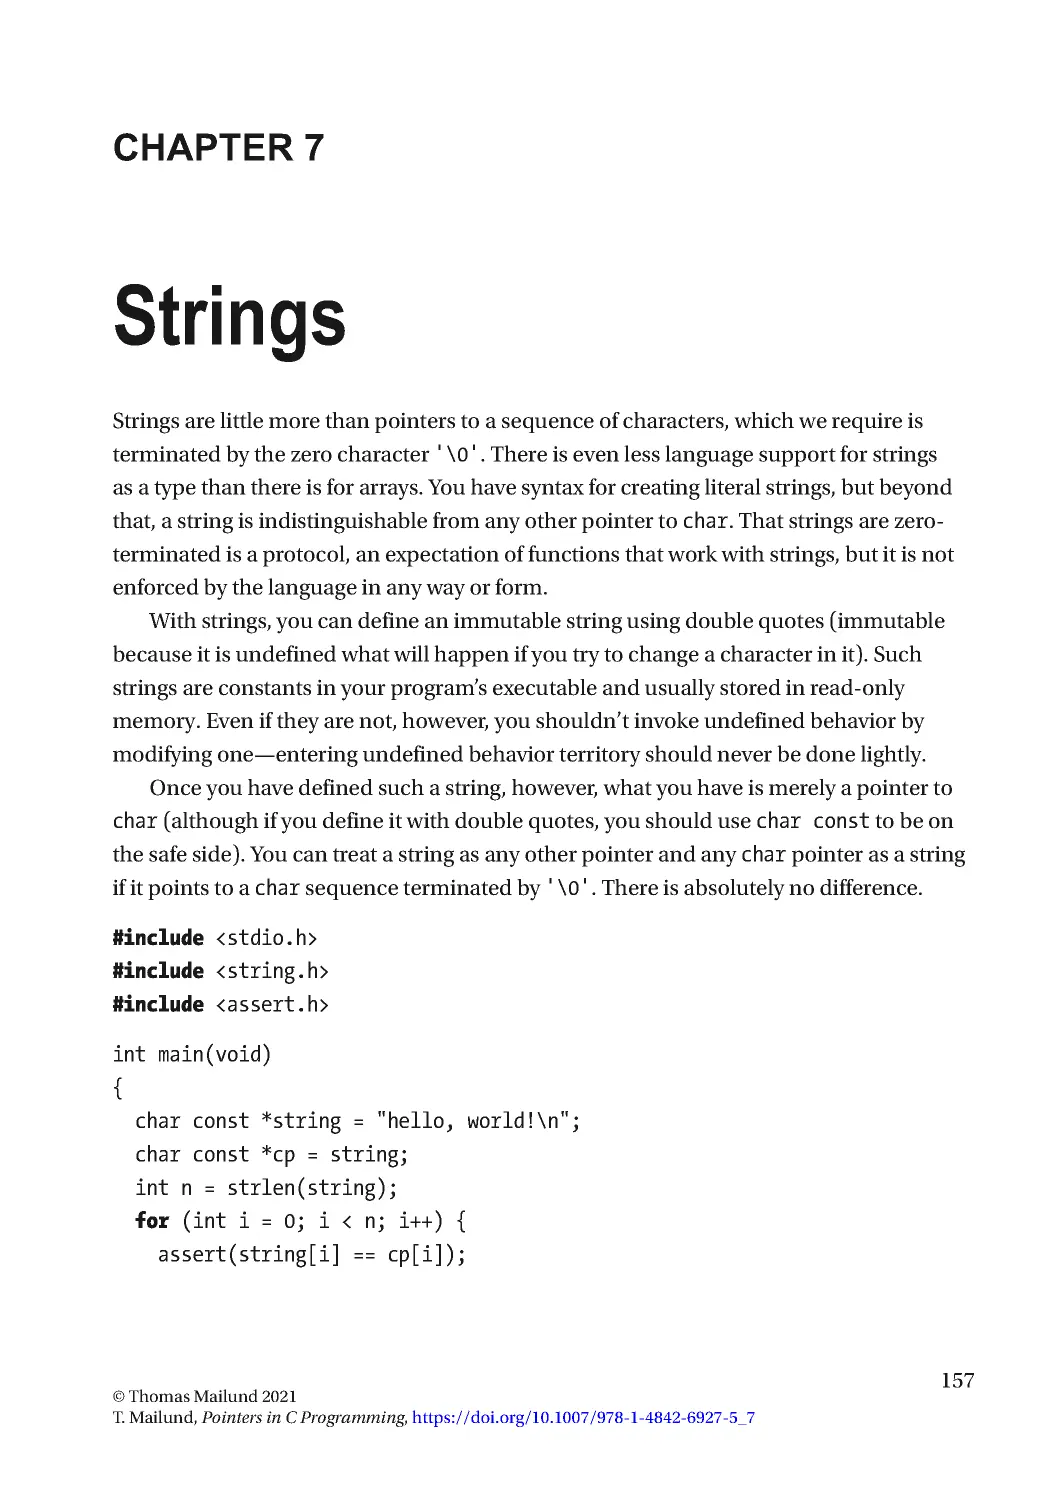 Chapter 7: Strings